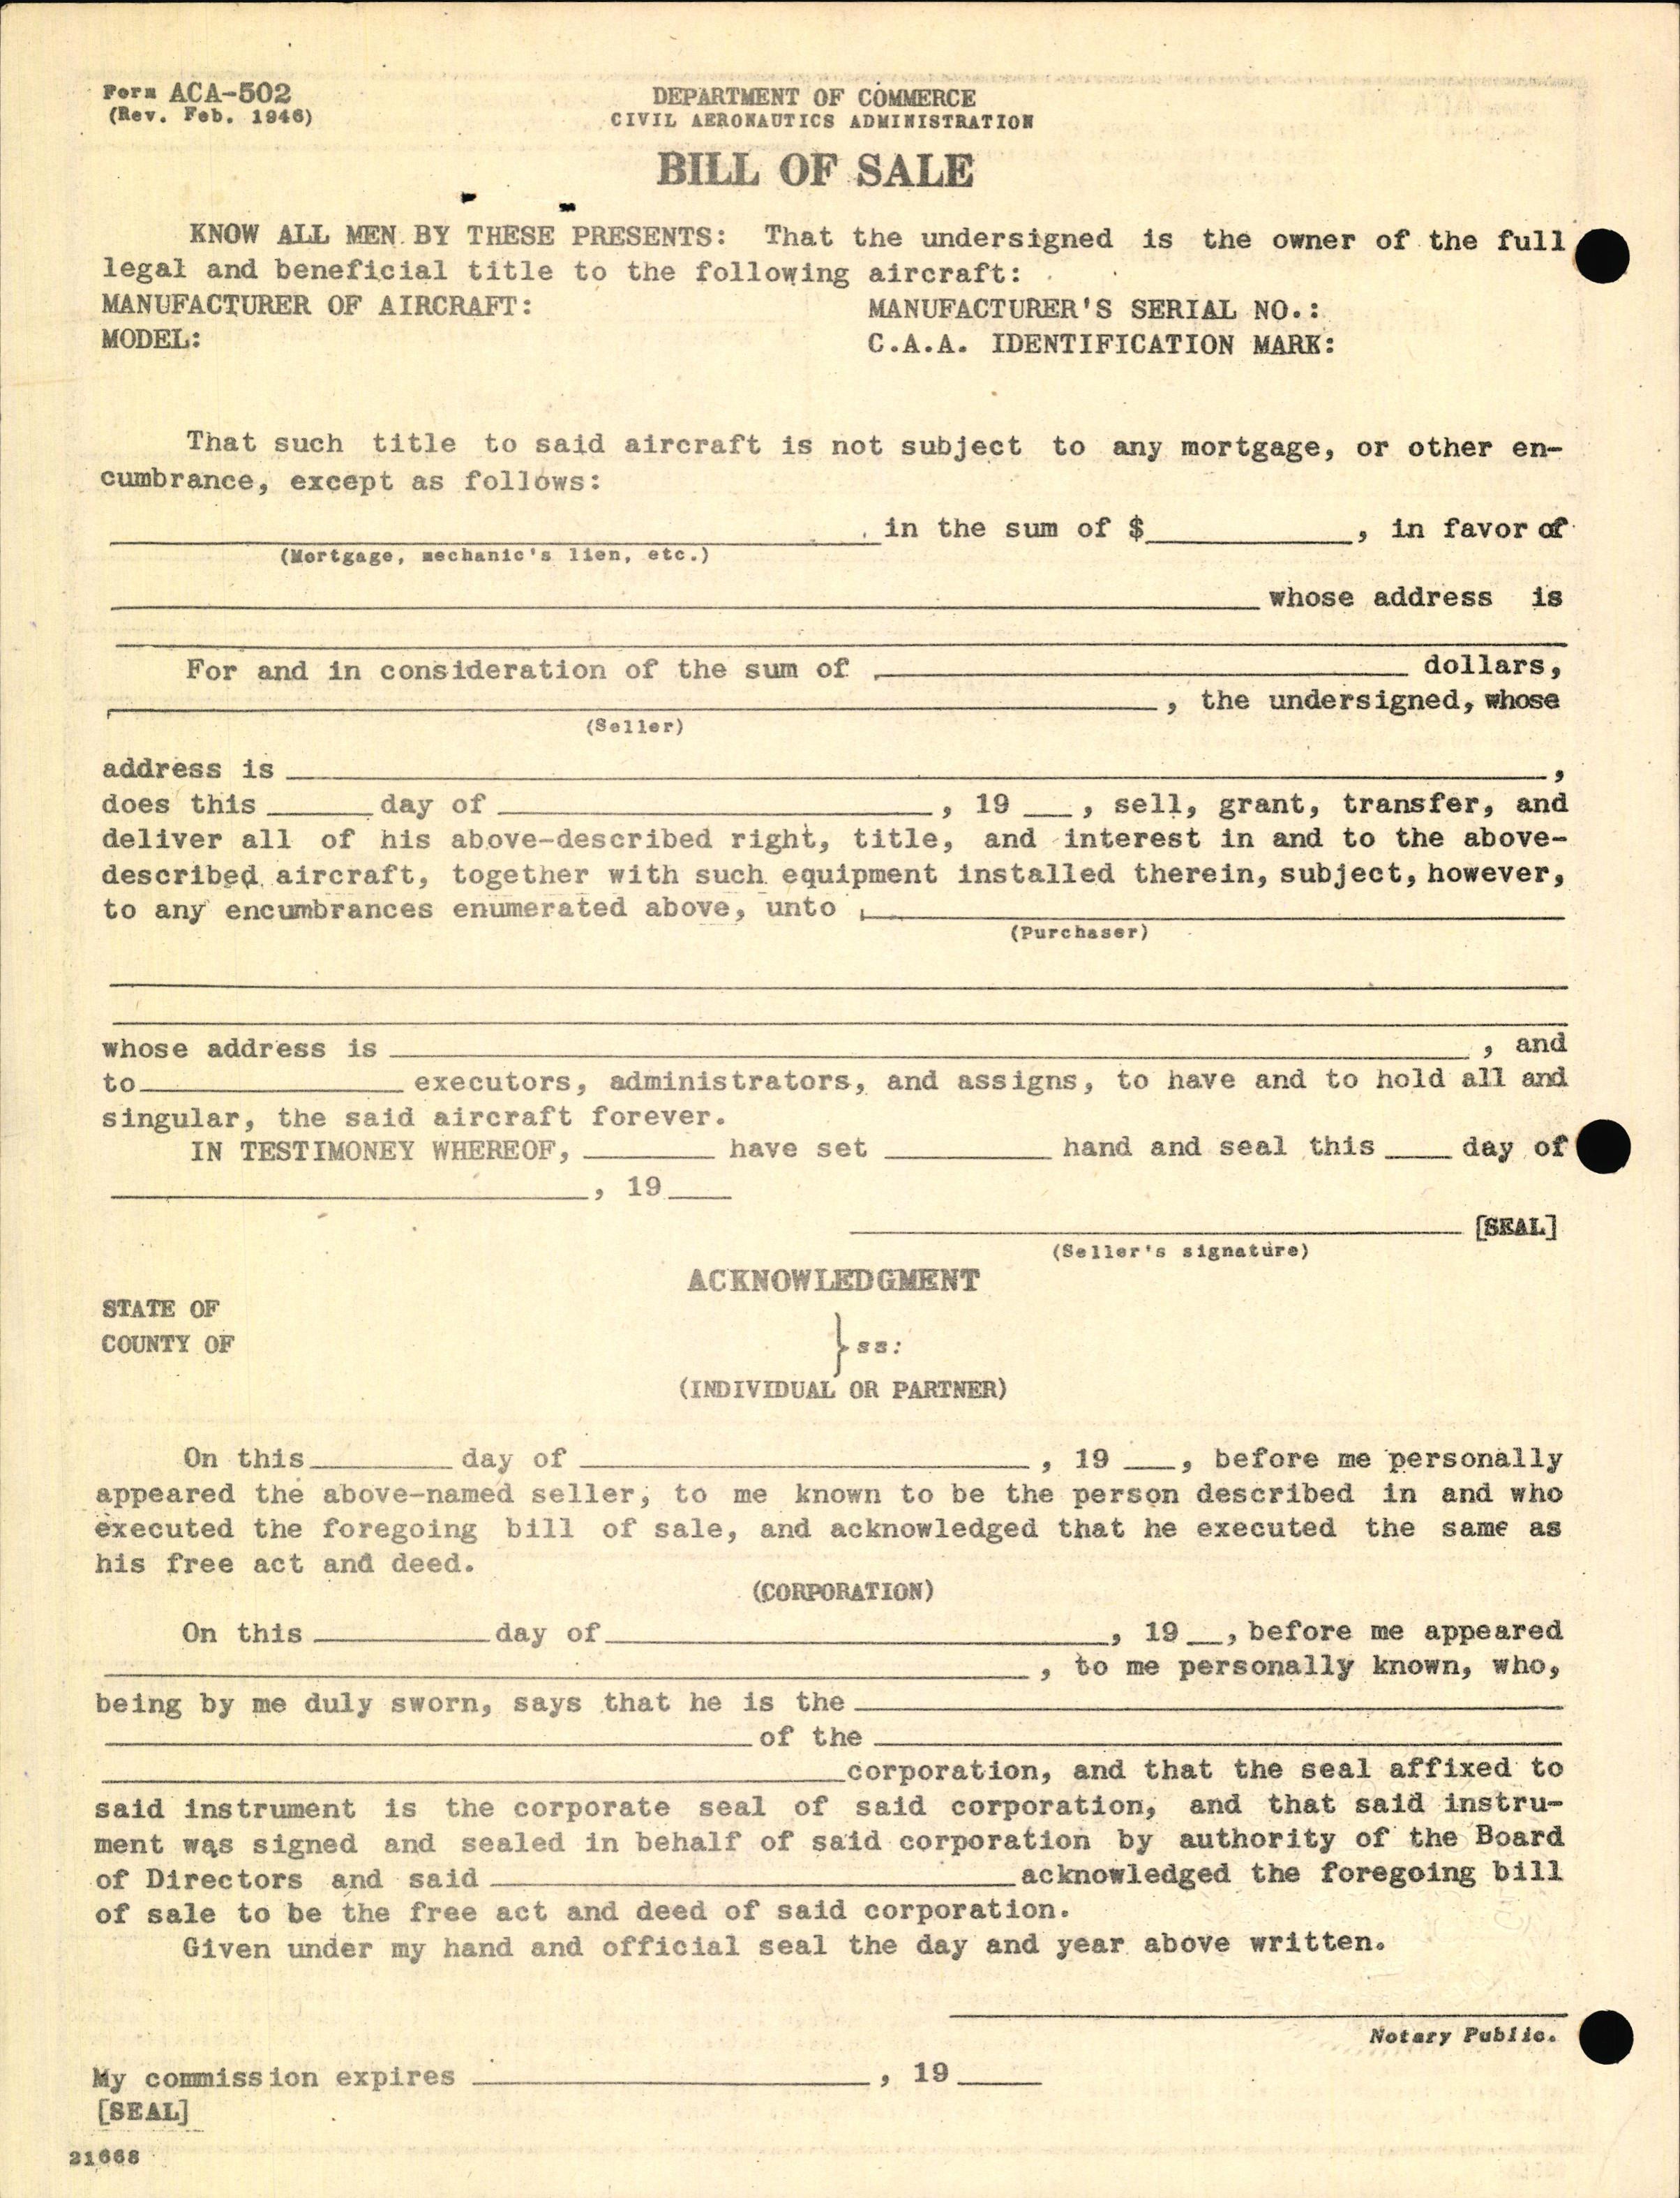 Sample page 2 from AirCorps Library document: Technical Information for Serial Number 2118